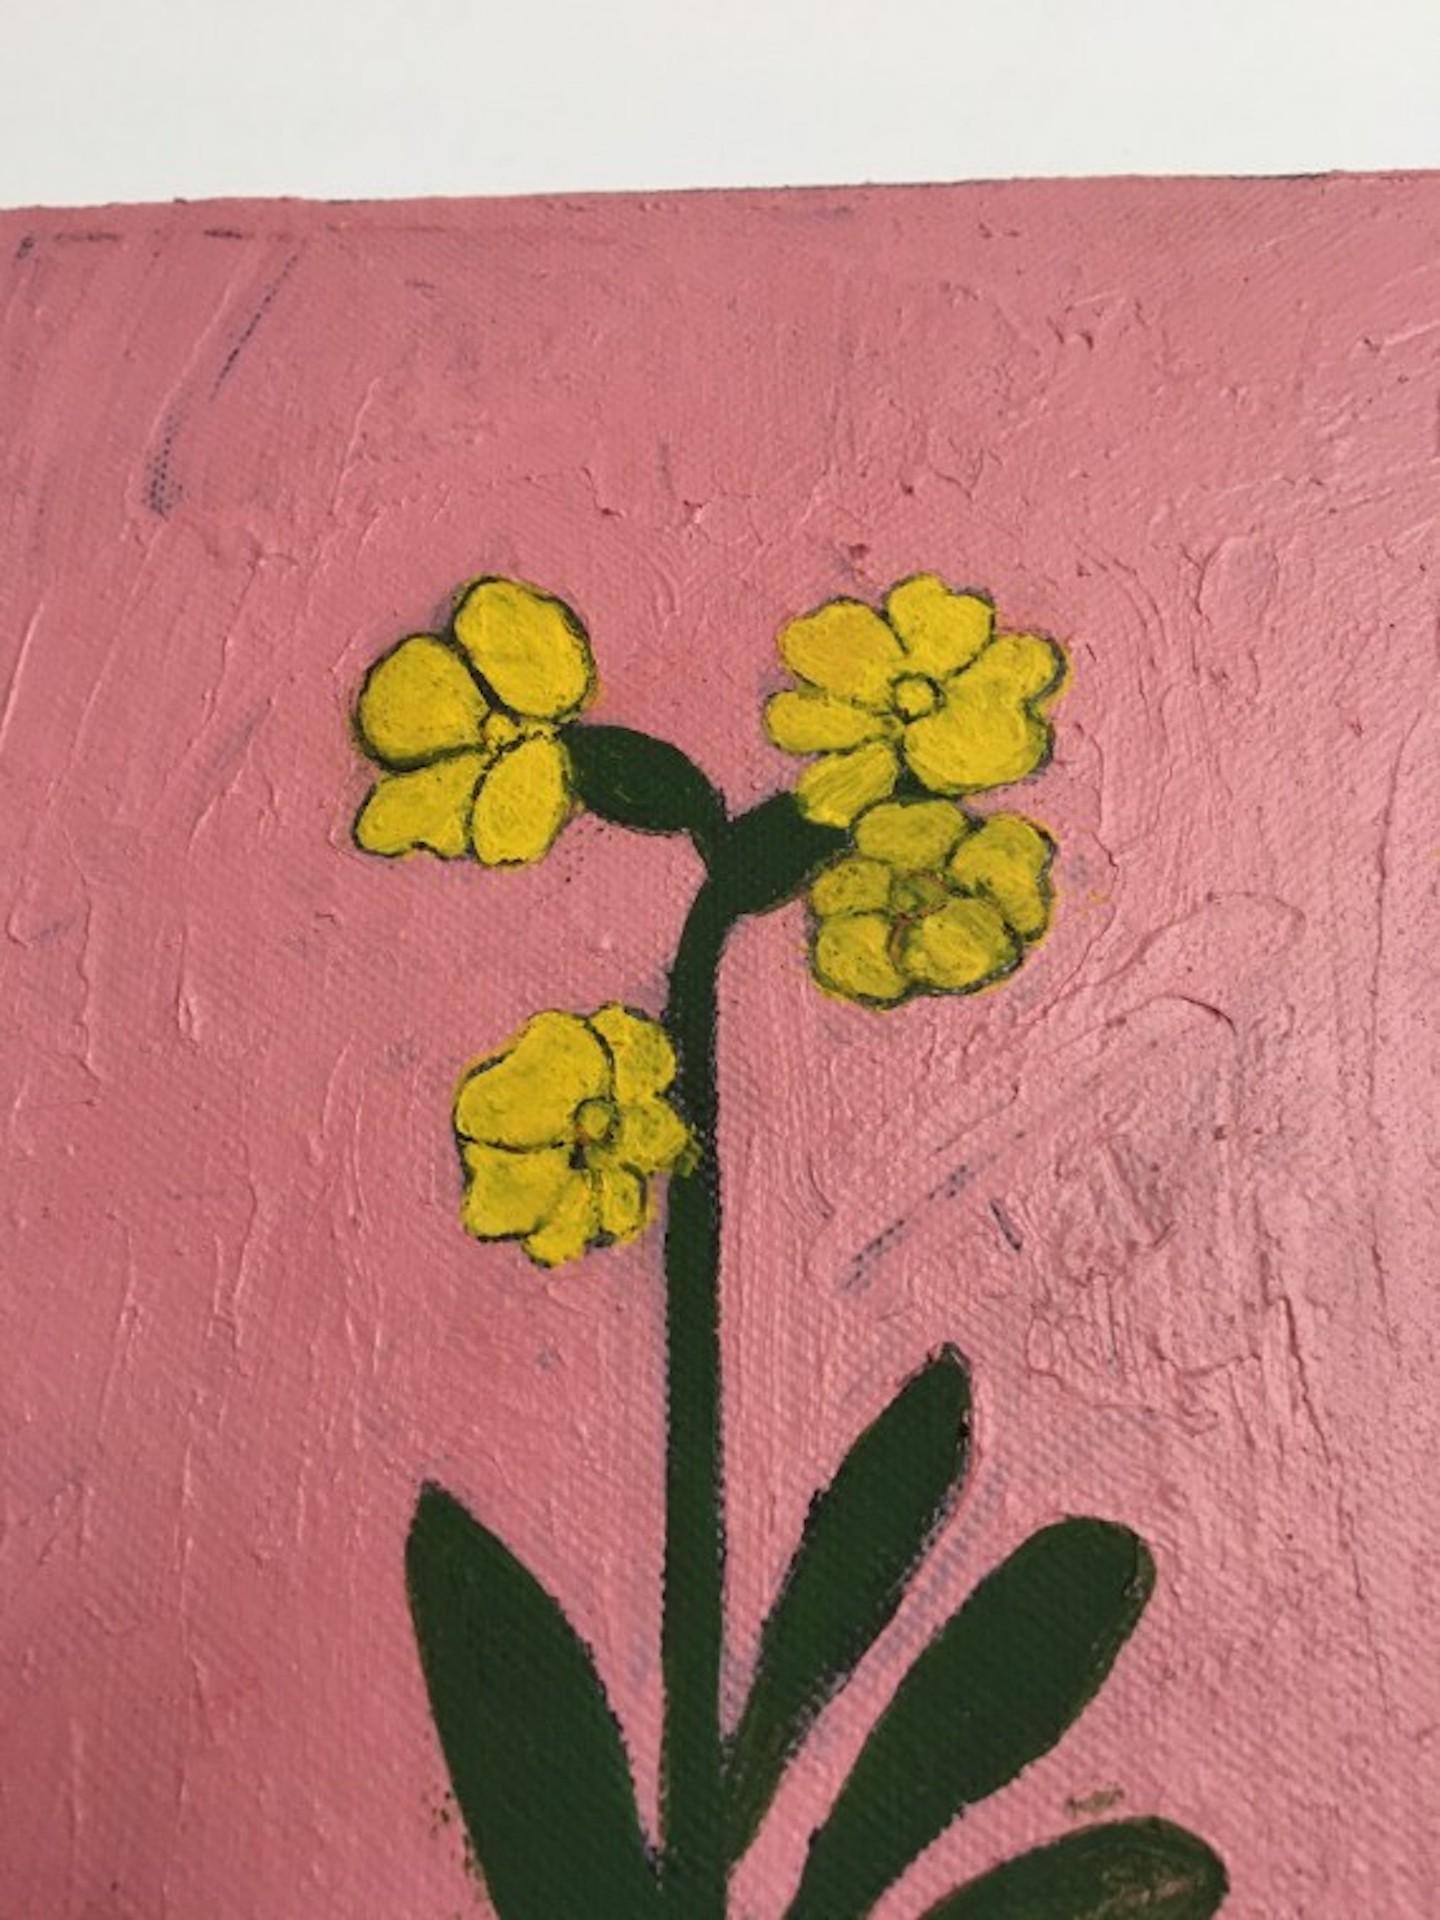 Yellow Flowers 
Original
Flowers
Acrylic on Canvas
Size: : H:20 cm x W:20 cm x D:2.5cm
Sold Unframed
Please note that insitu images are purely an indication of how a piece may look

Yellow Flowers is a cheerful, bold contemporary Still Life Flower